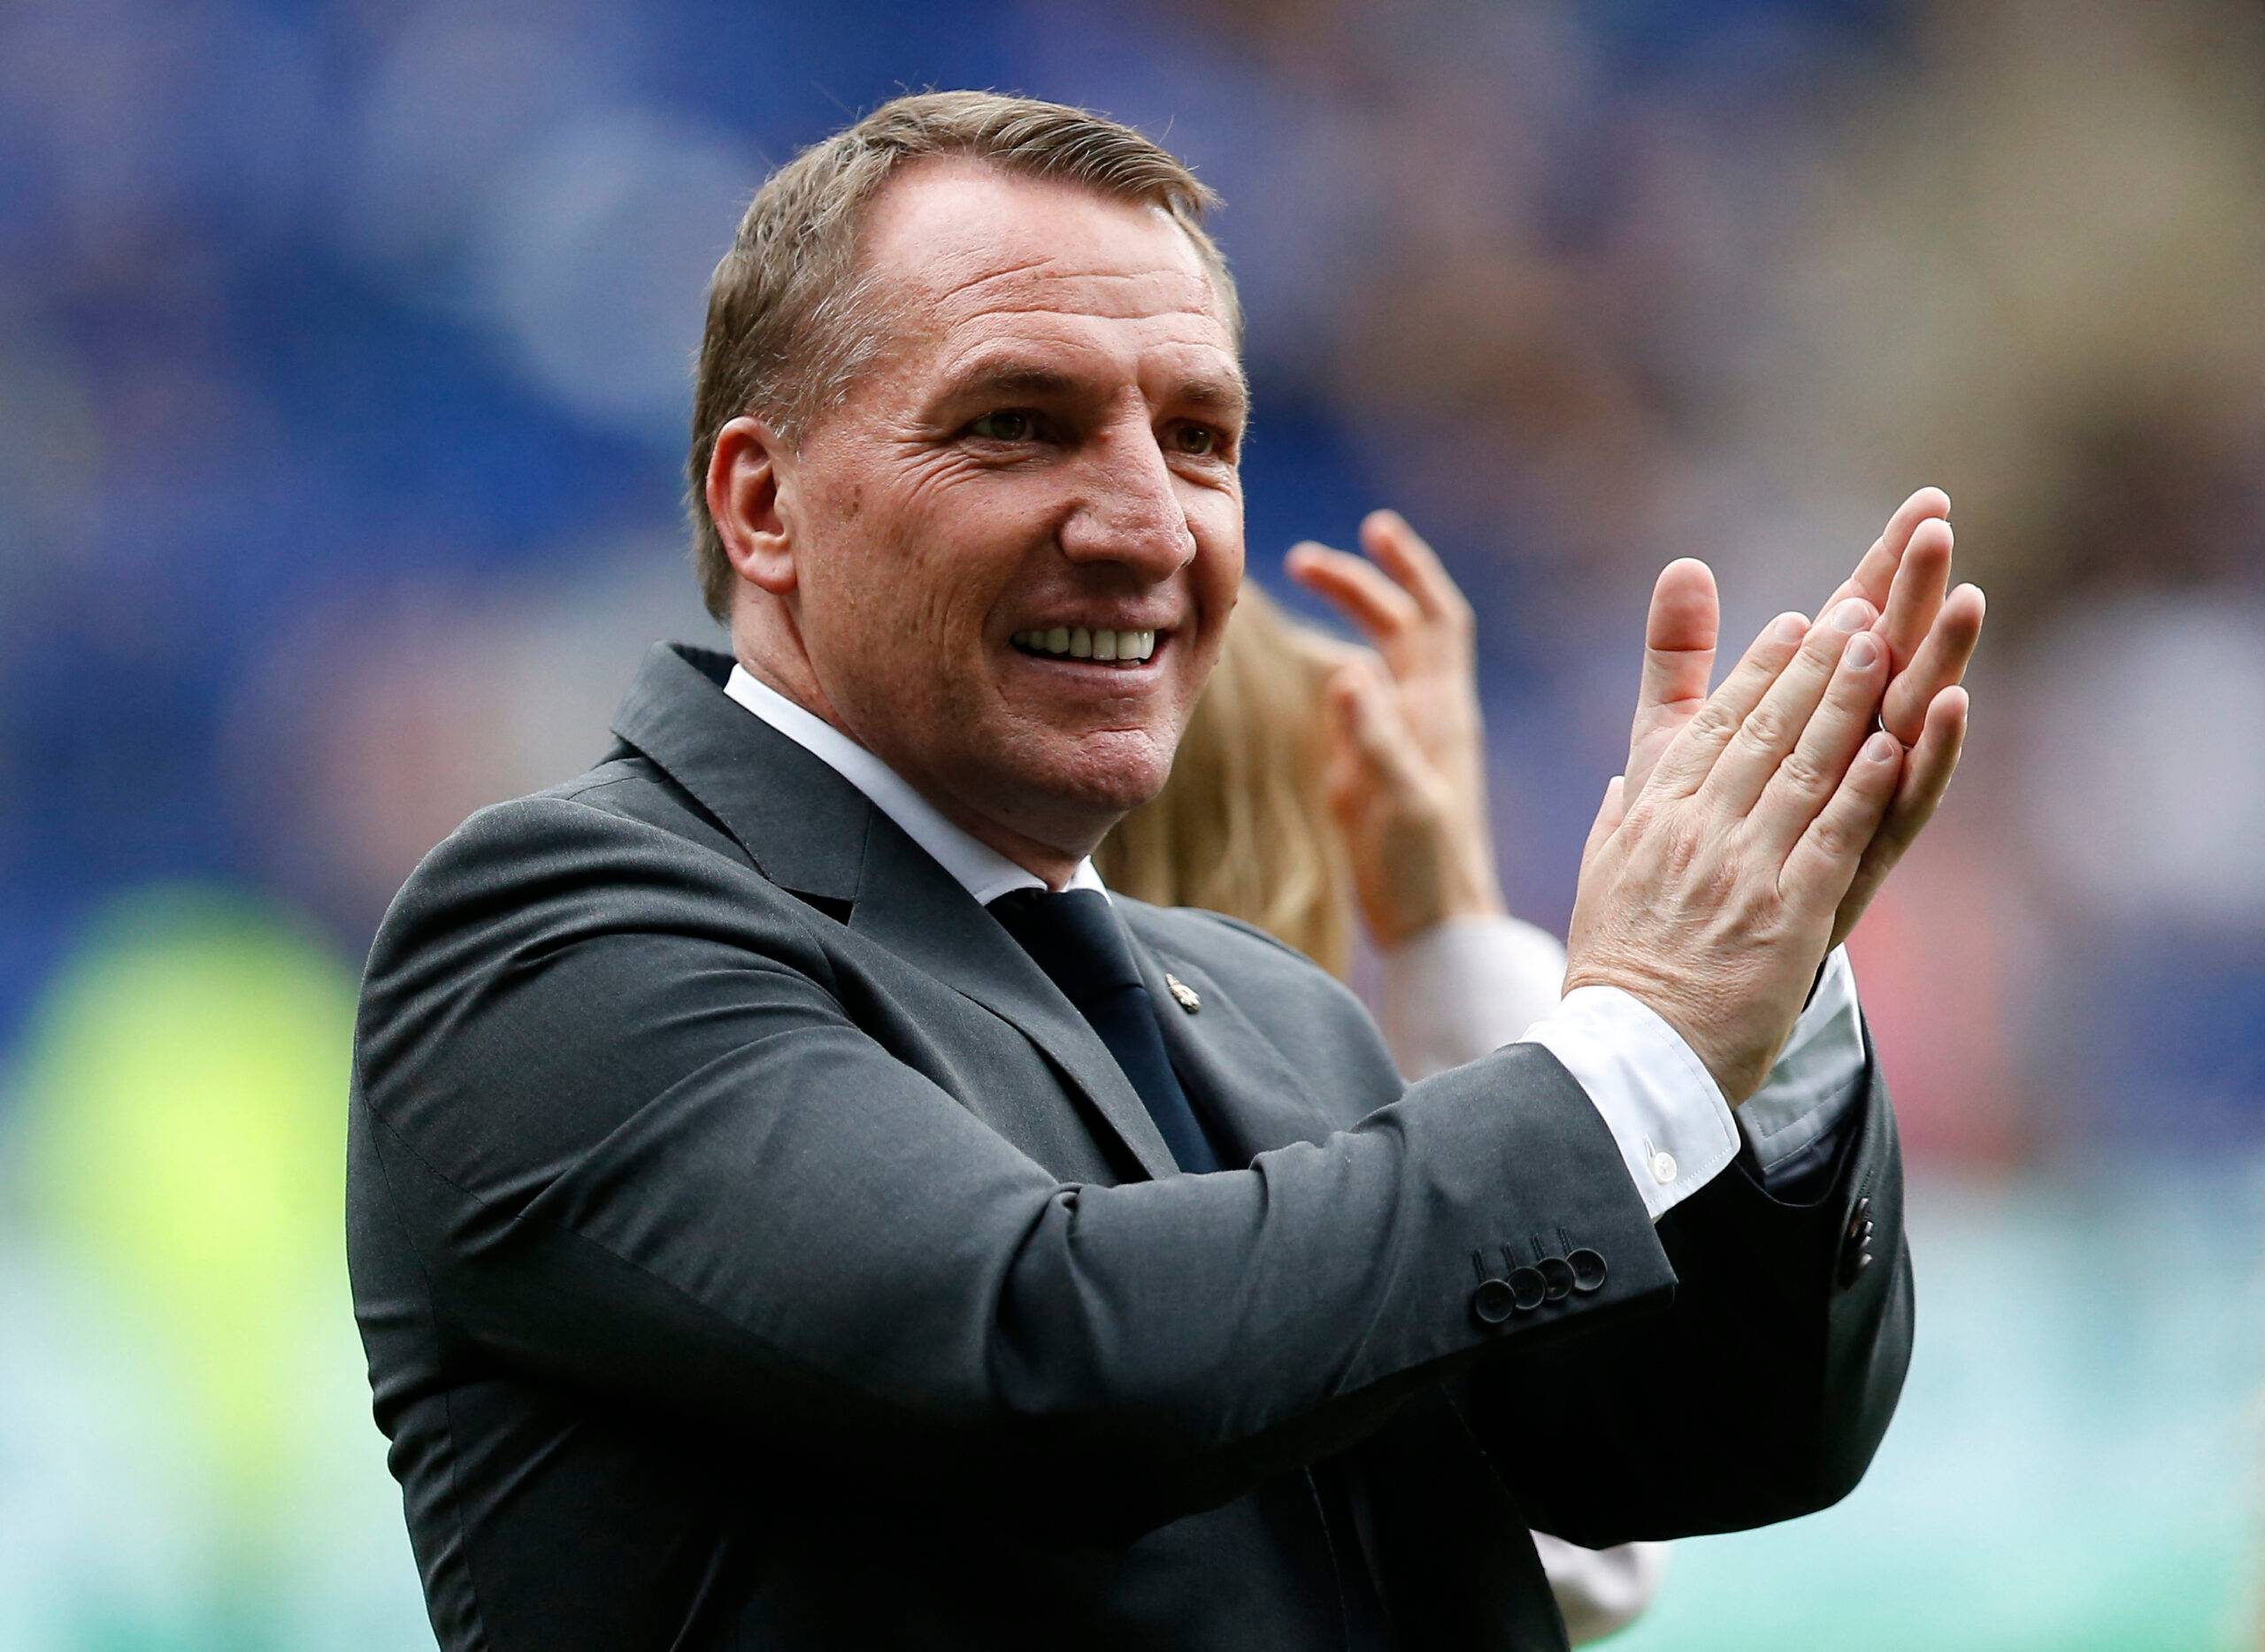 Brendan Rodgers taking charge of a Premier League game for Leicester City